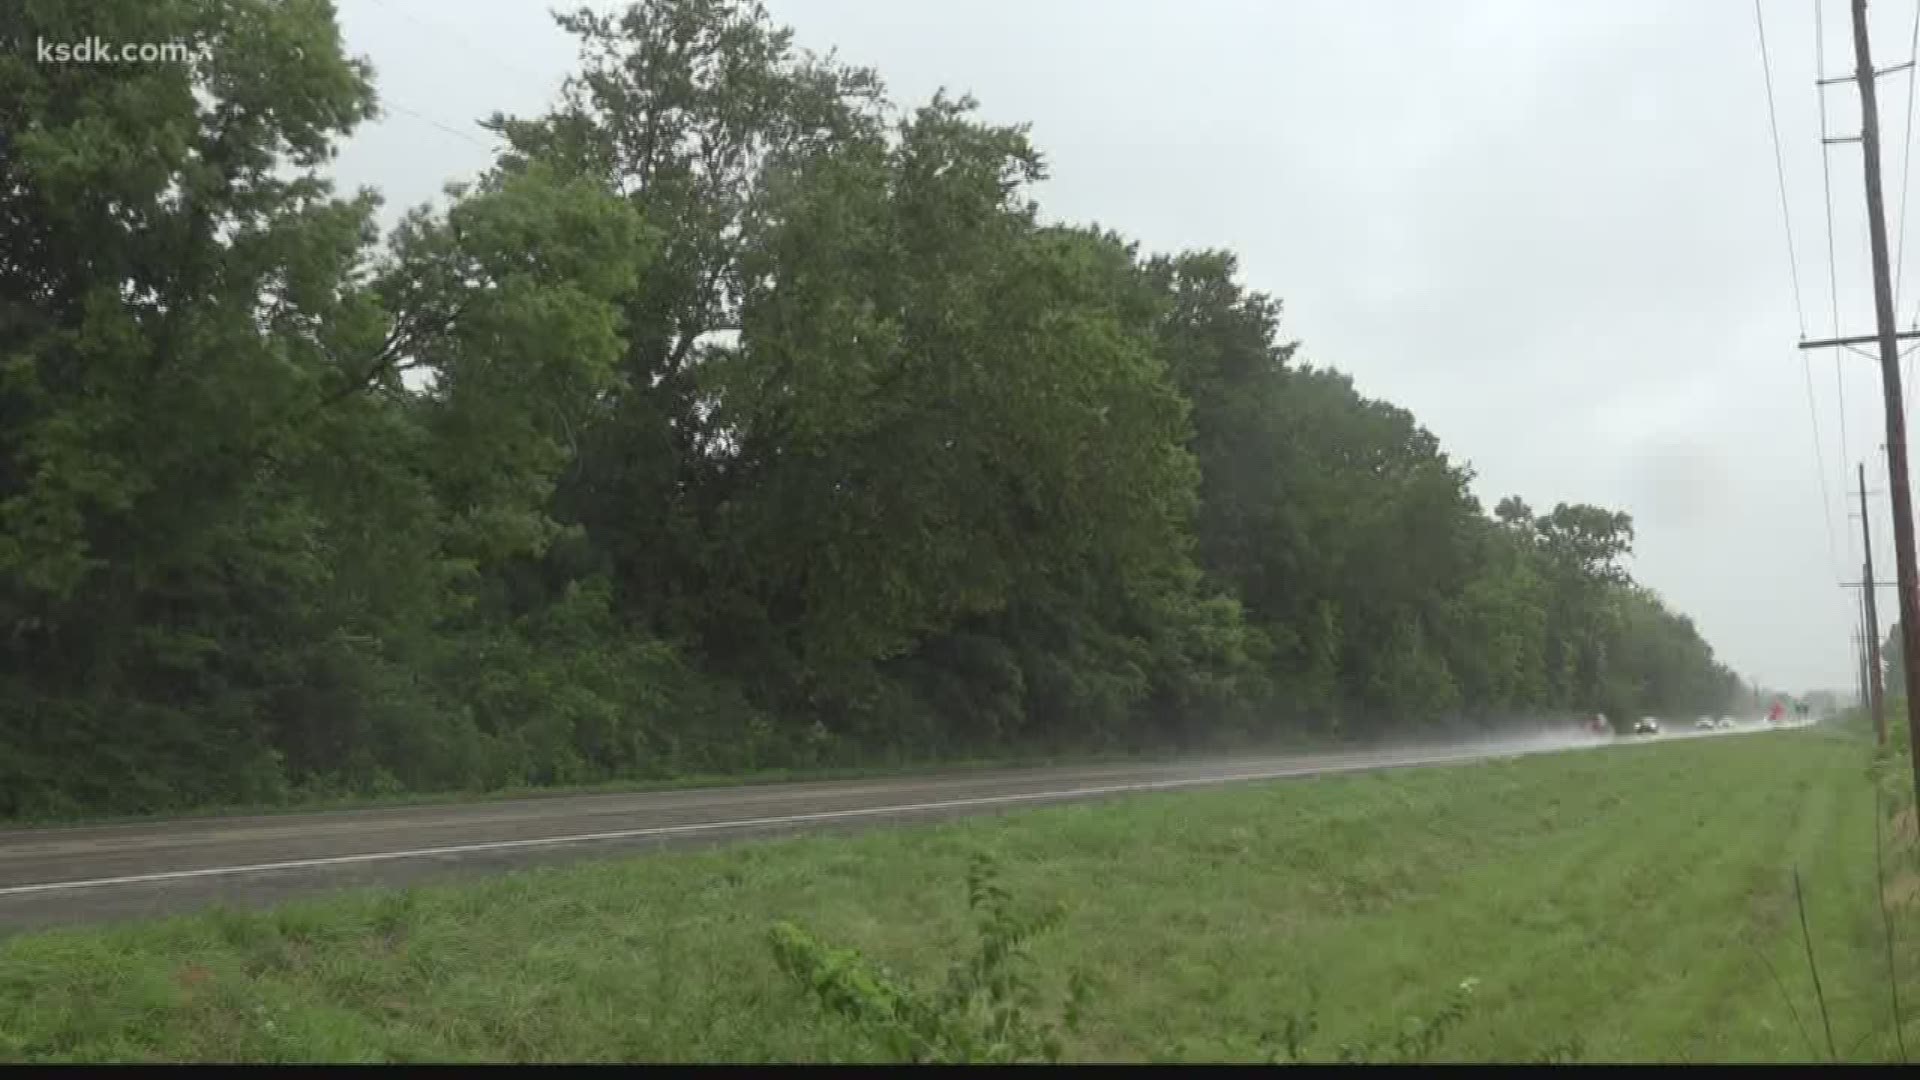 Saint Charles County drivers are concerned about their safety after a man was impaled on a road there Friday.